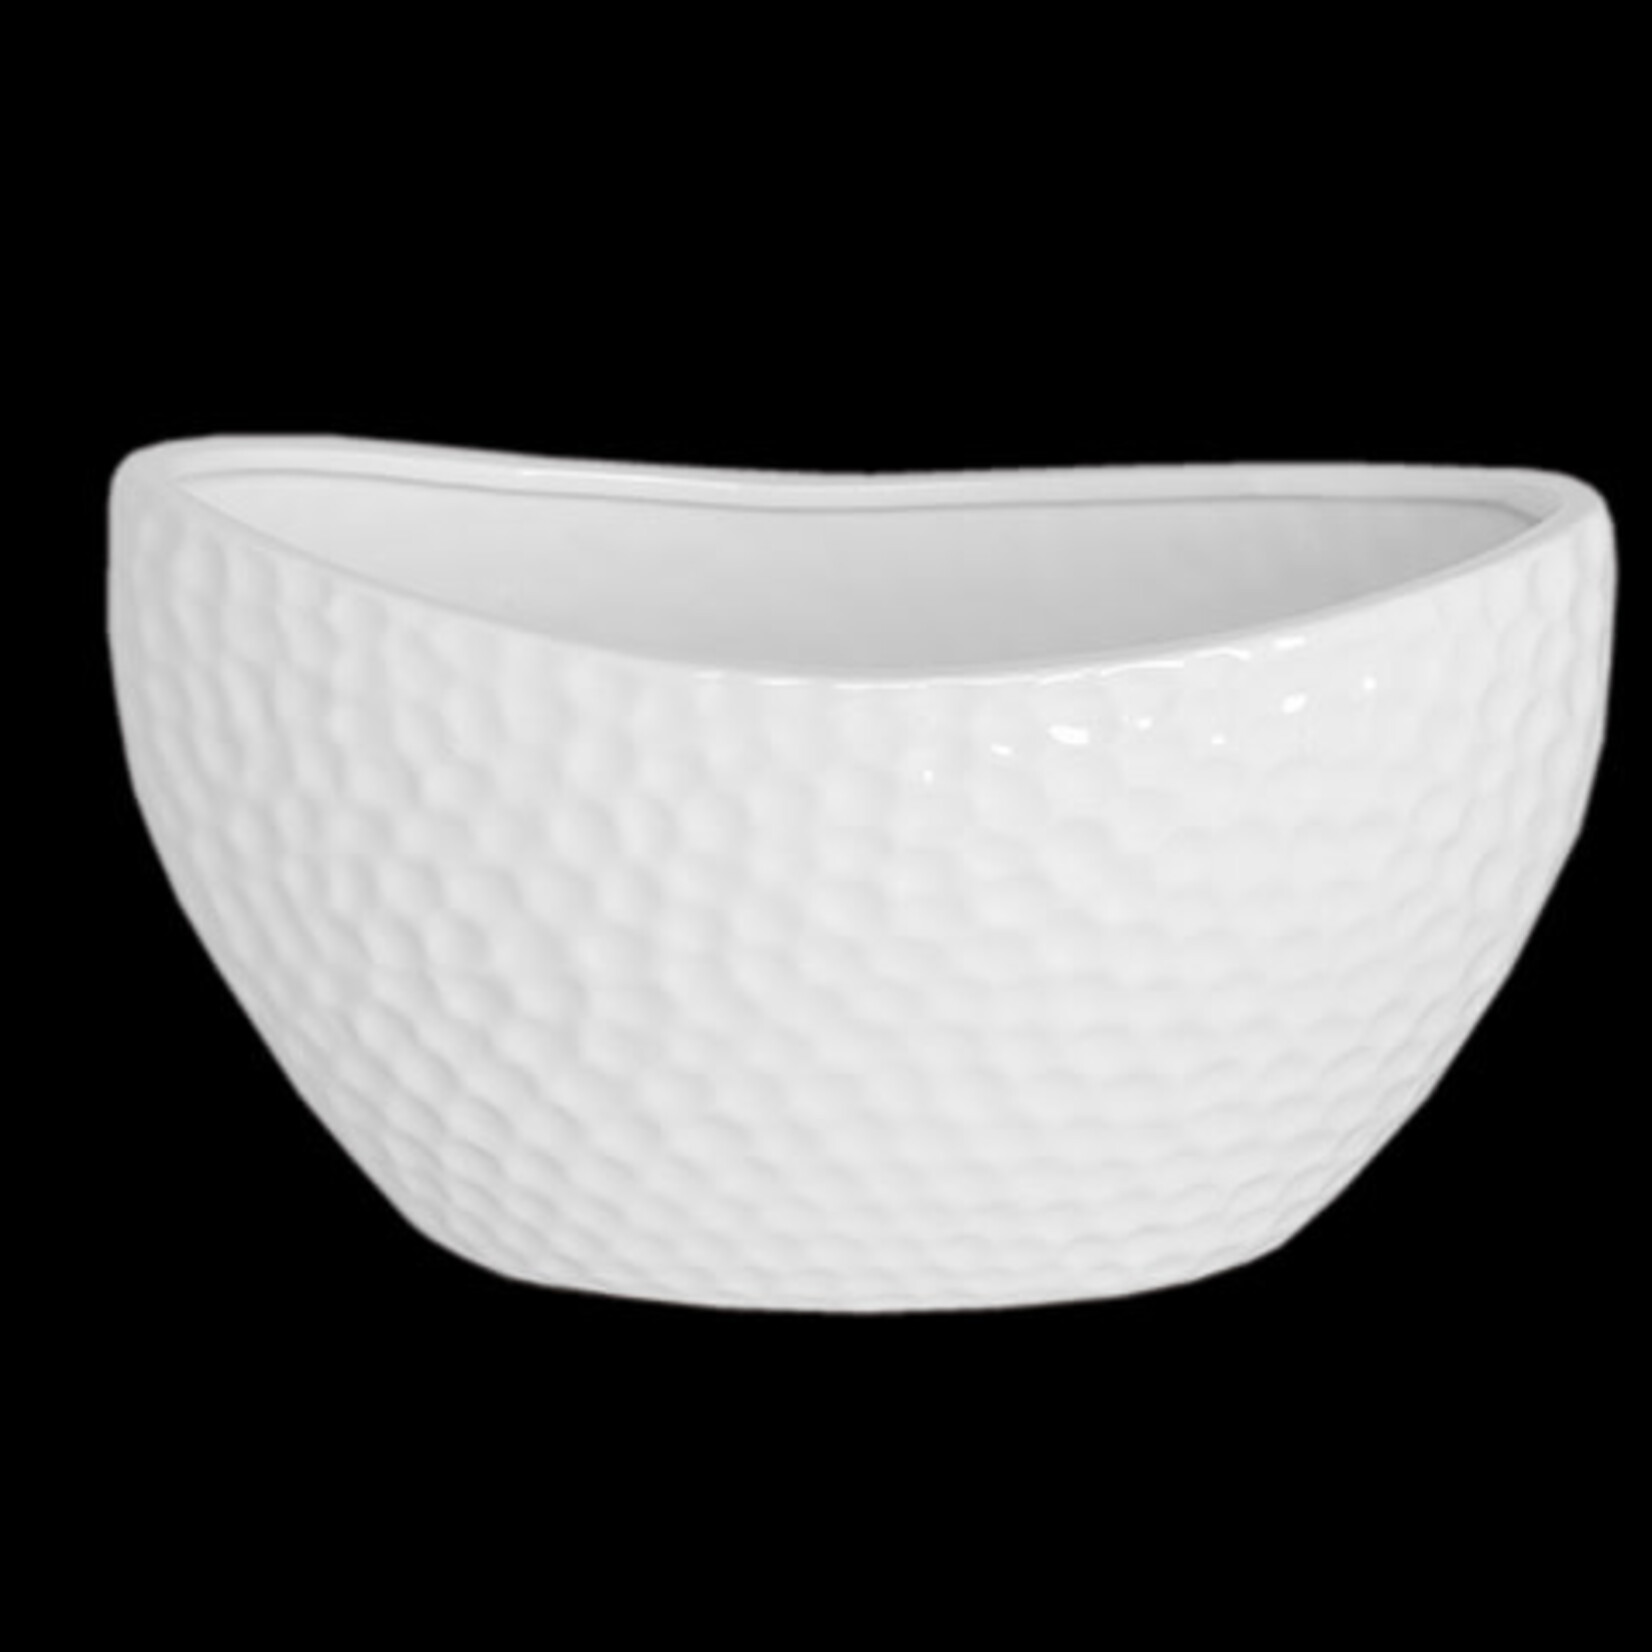 5.5”H X 5.75”W X 10” MATTE WHITE Ceramic Oval Vase with Bended Rim Mouth and Pressed Pattern Design